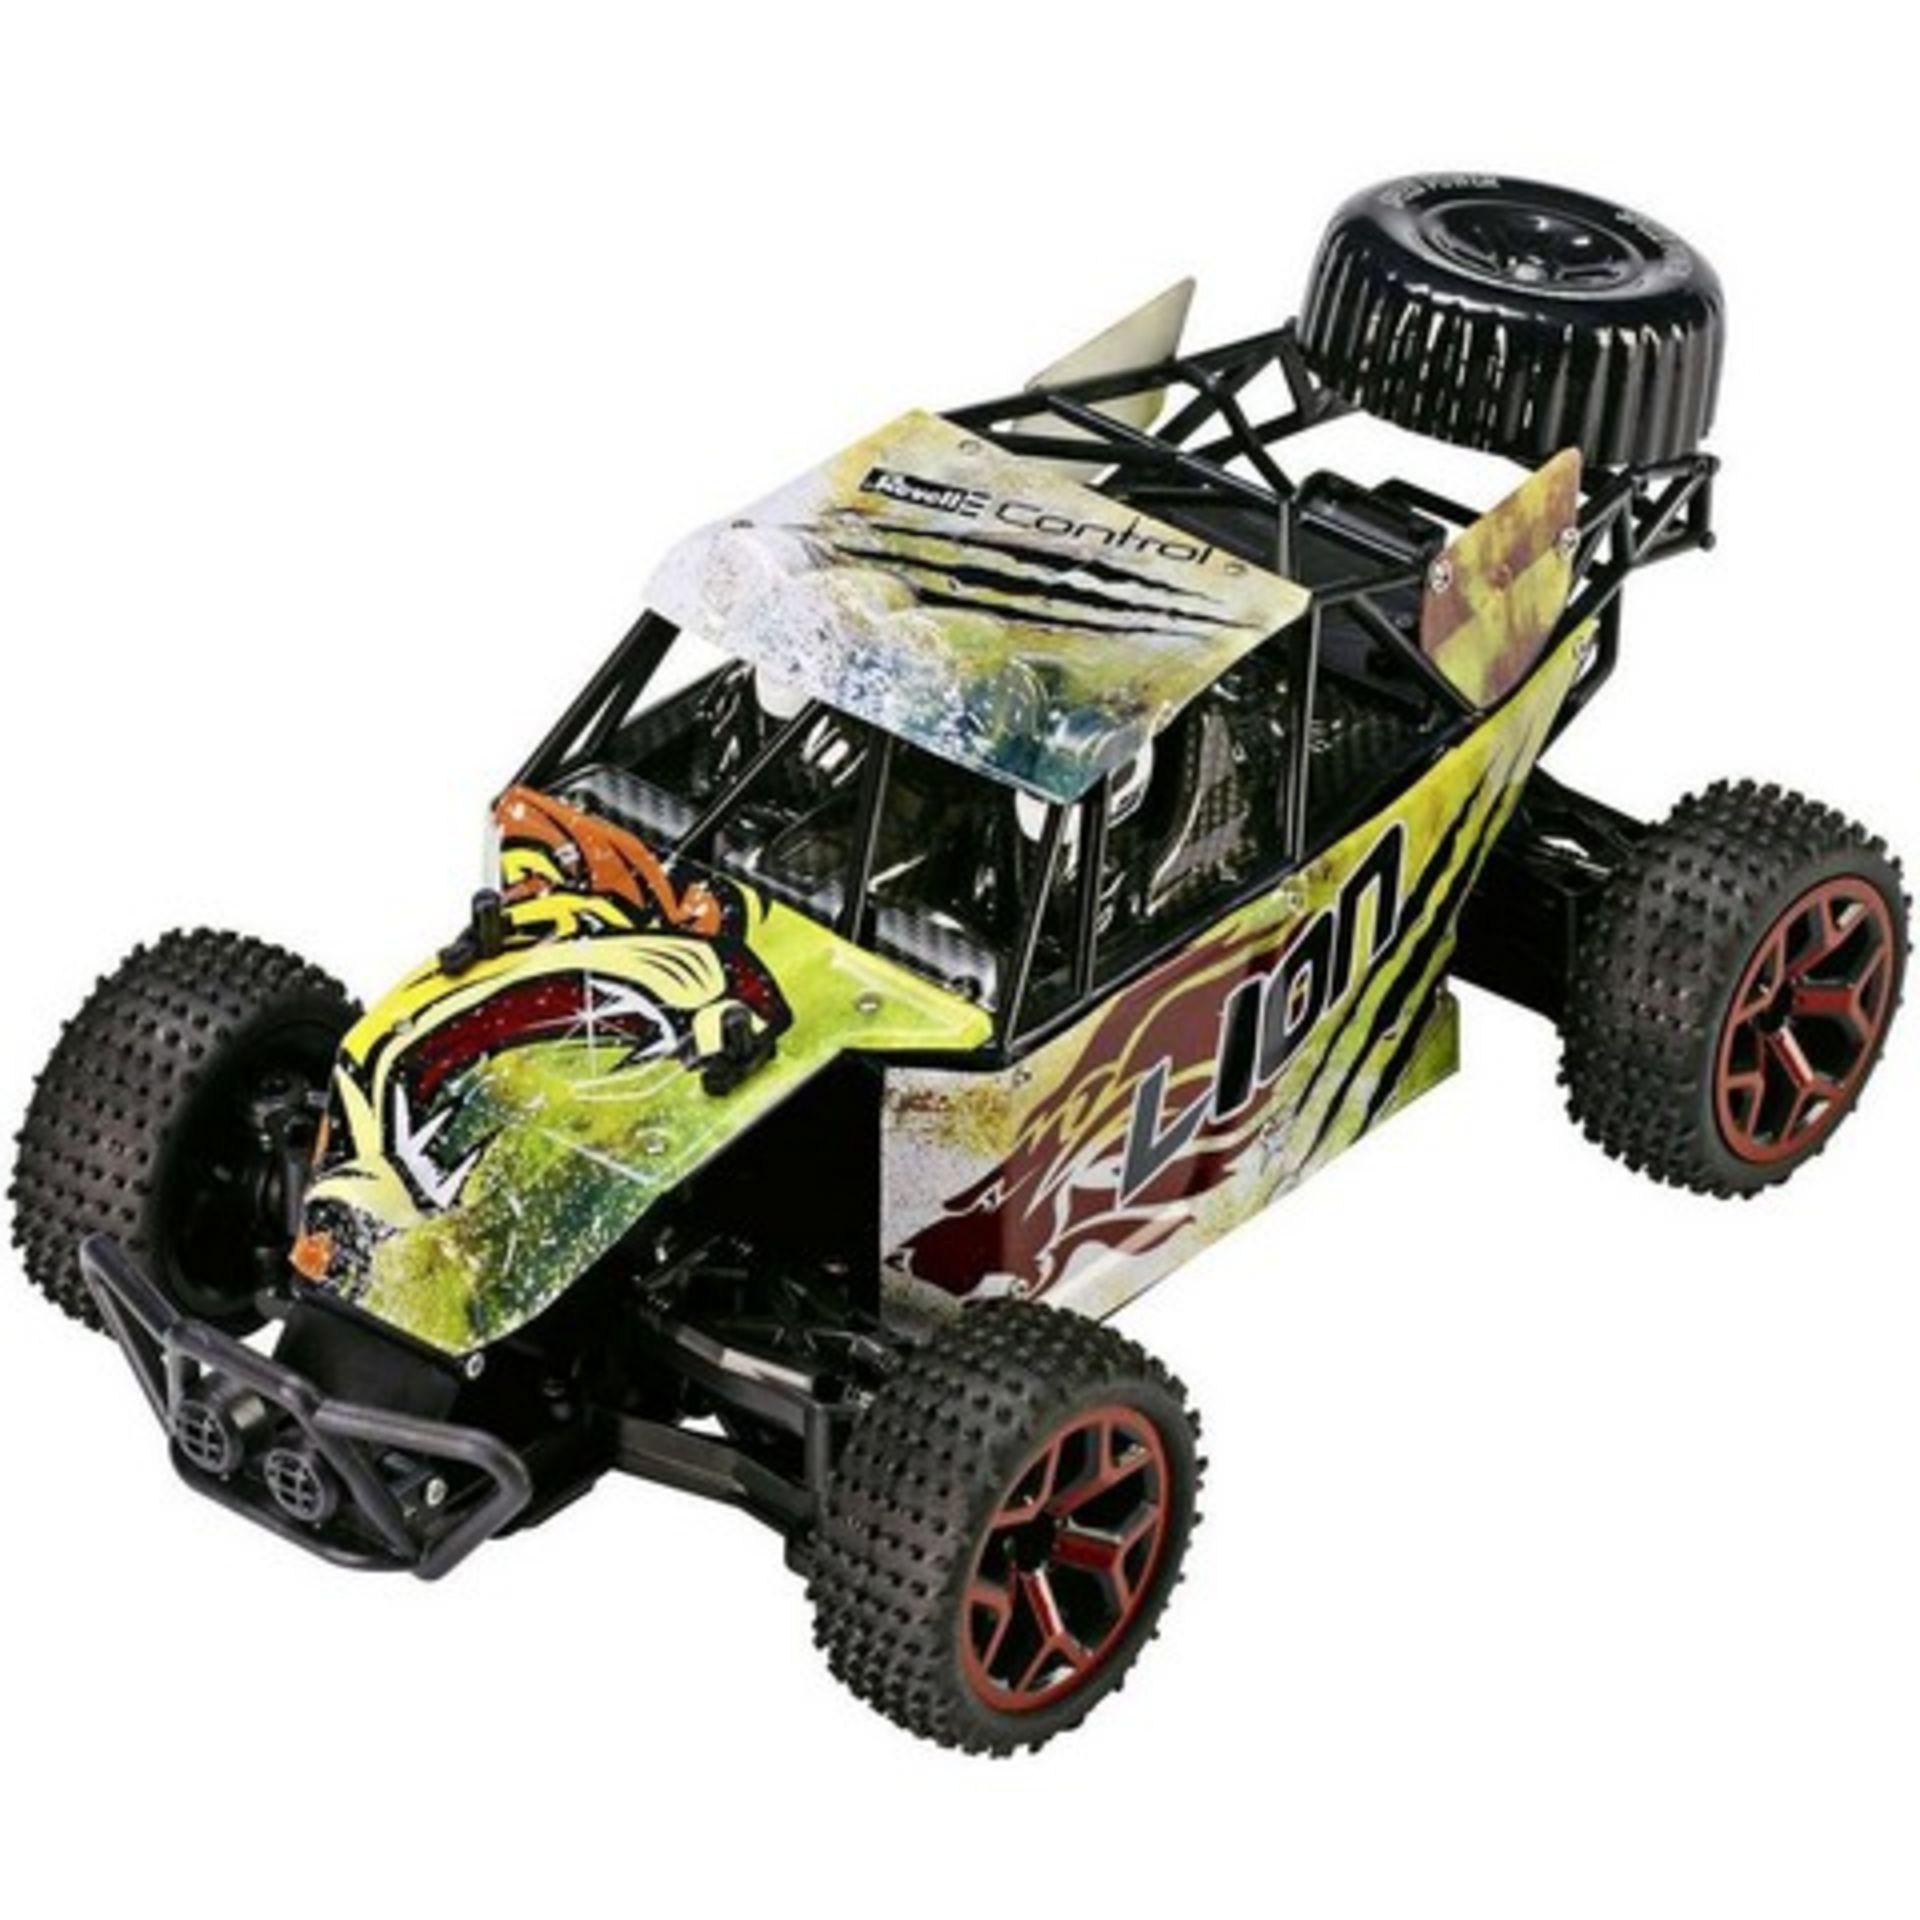 + VAT Brand New Revell R/C 4 Wheel Drive Sand Buggy Lion Up To 15 kph 2.4GHz 2 Channel Remote